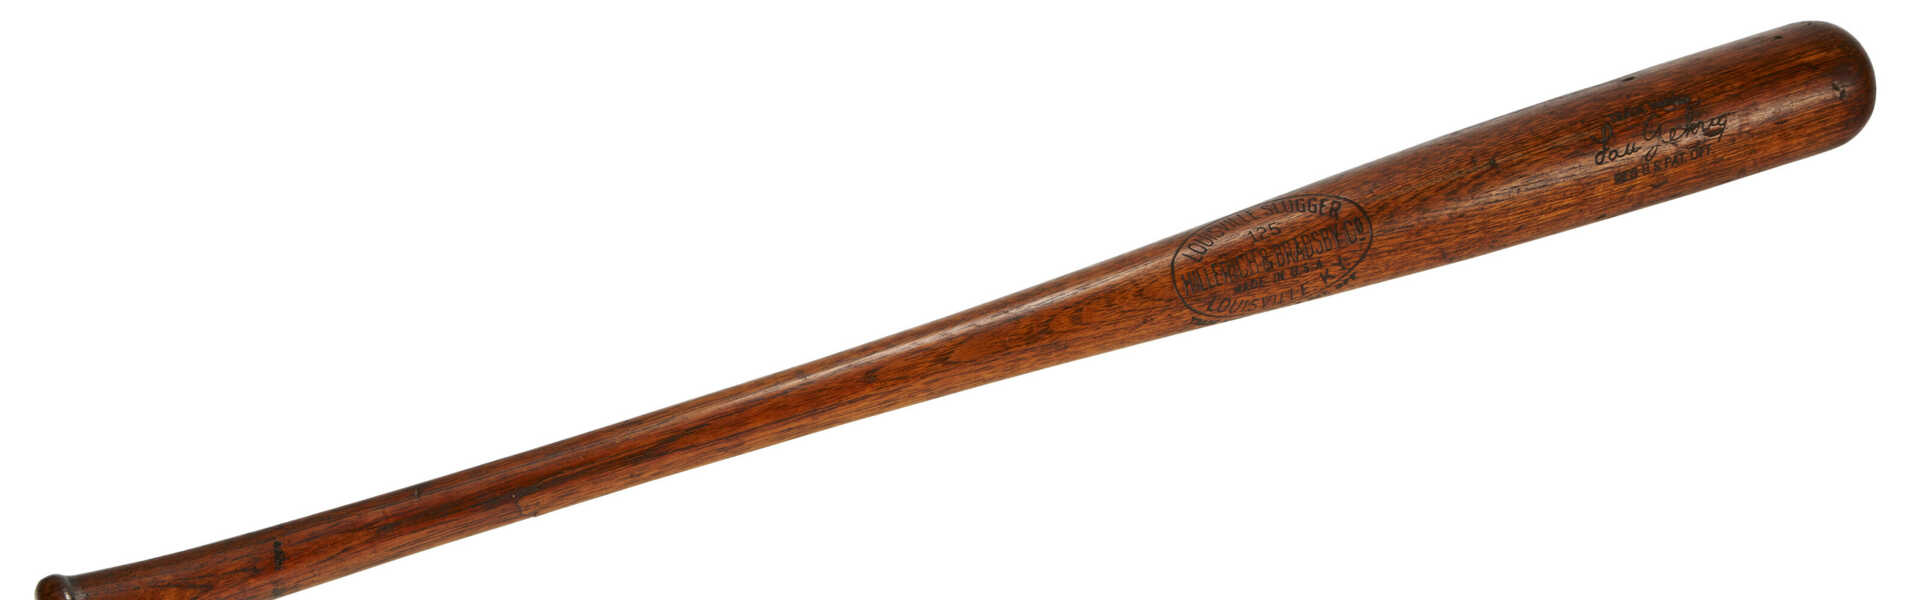 RARE LOU GEHRIG PROFESSIONAL MODEL BASEBALL BAT ORDERED DURING HISTORIC 1927 SEASON WITH UNIQUE TONY LAZZERI HILLERICH &amp; BRADSBY CO. FACTORY SIDE WRITING (PSA/DNA GU 8)(WORLD CHAMPIONSHIP SEASON)